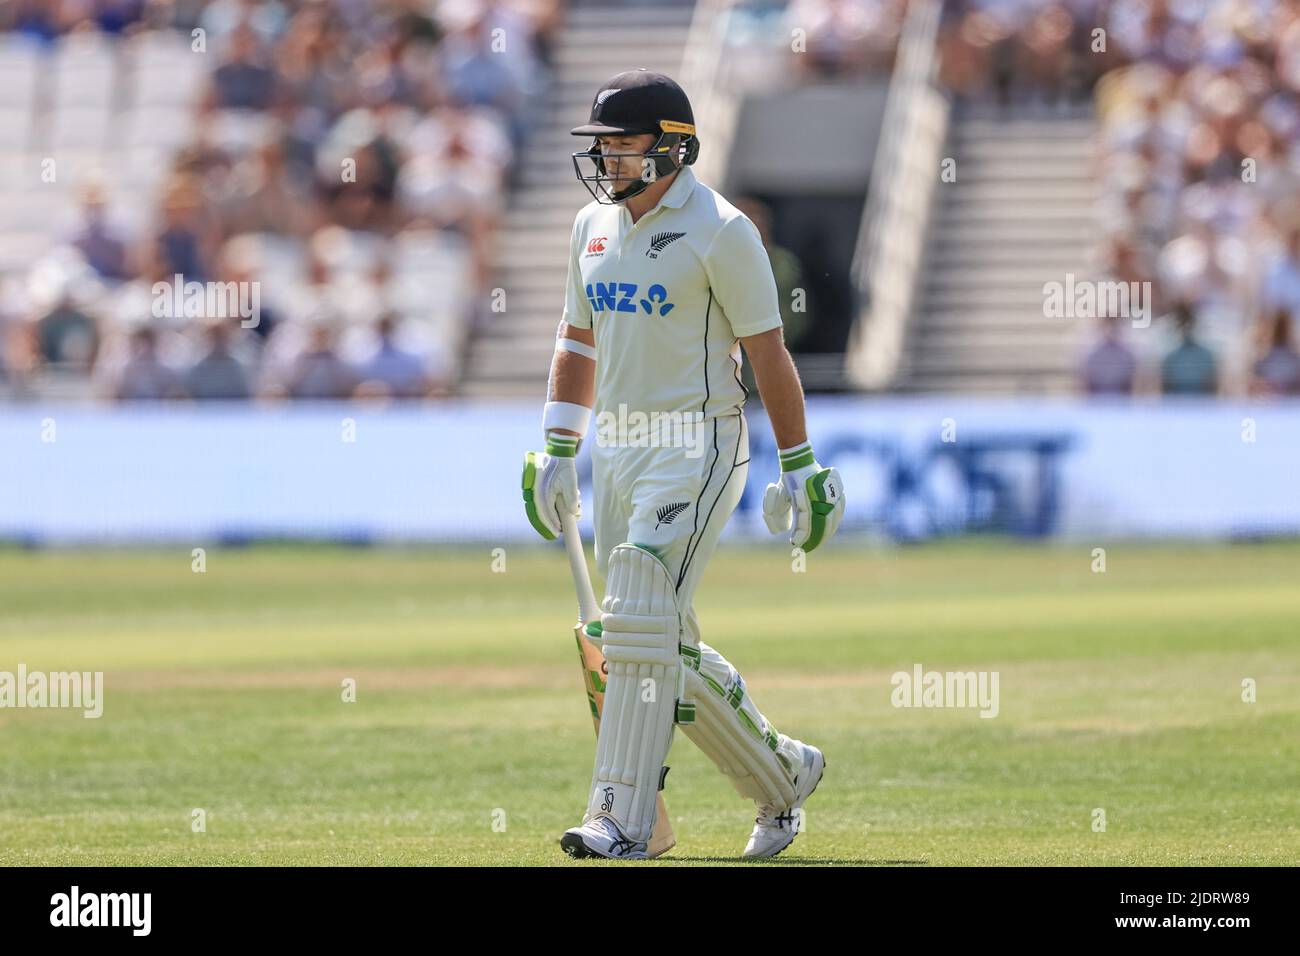 Leeds, UK. 23rd June, 2022. Tom Latham of New Zealand is dismissed after being caught by Joe Root of England in Leeds, United Kingdom on 6/23/2022. (Photo by Mark Cosgrove/News Images/Sipa USA) Credit: Sipa USA/Alamy Live News Stock Photo